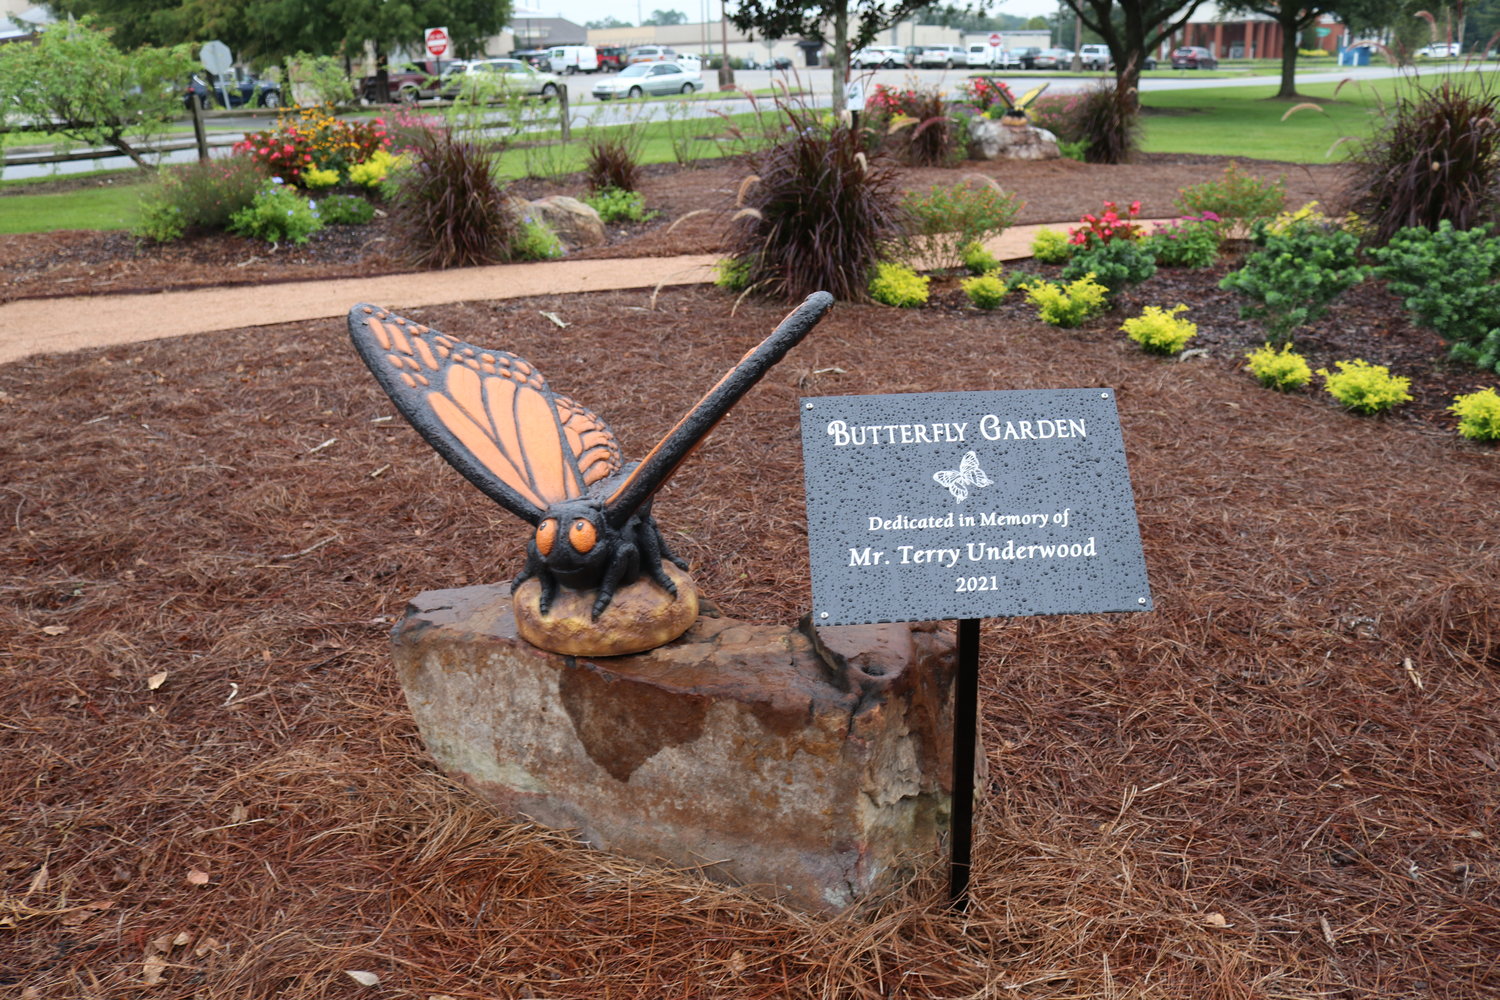 Foley’s new butterfly garden is located along the Rose Trail, just north of the Foley Dog Park, and is open to the public.